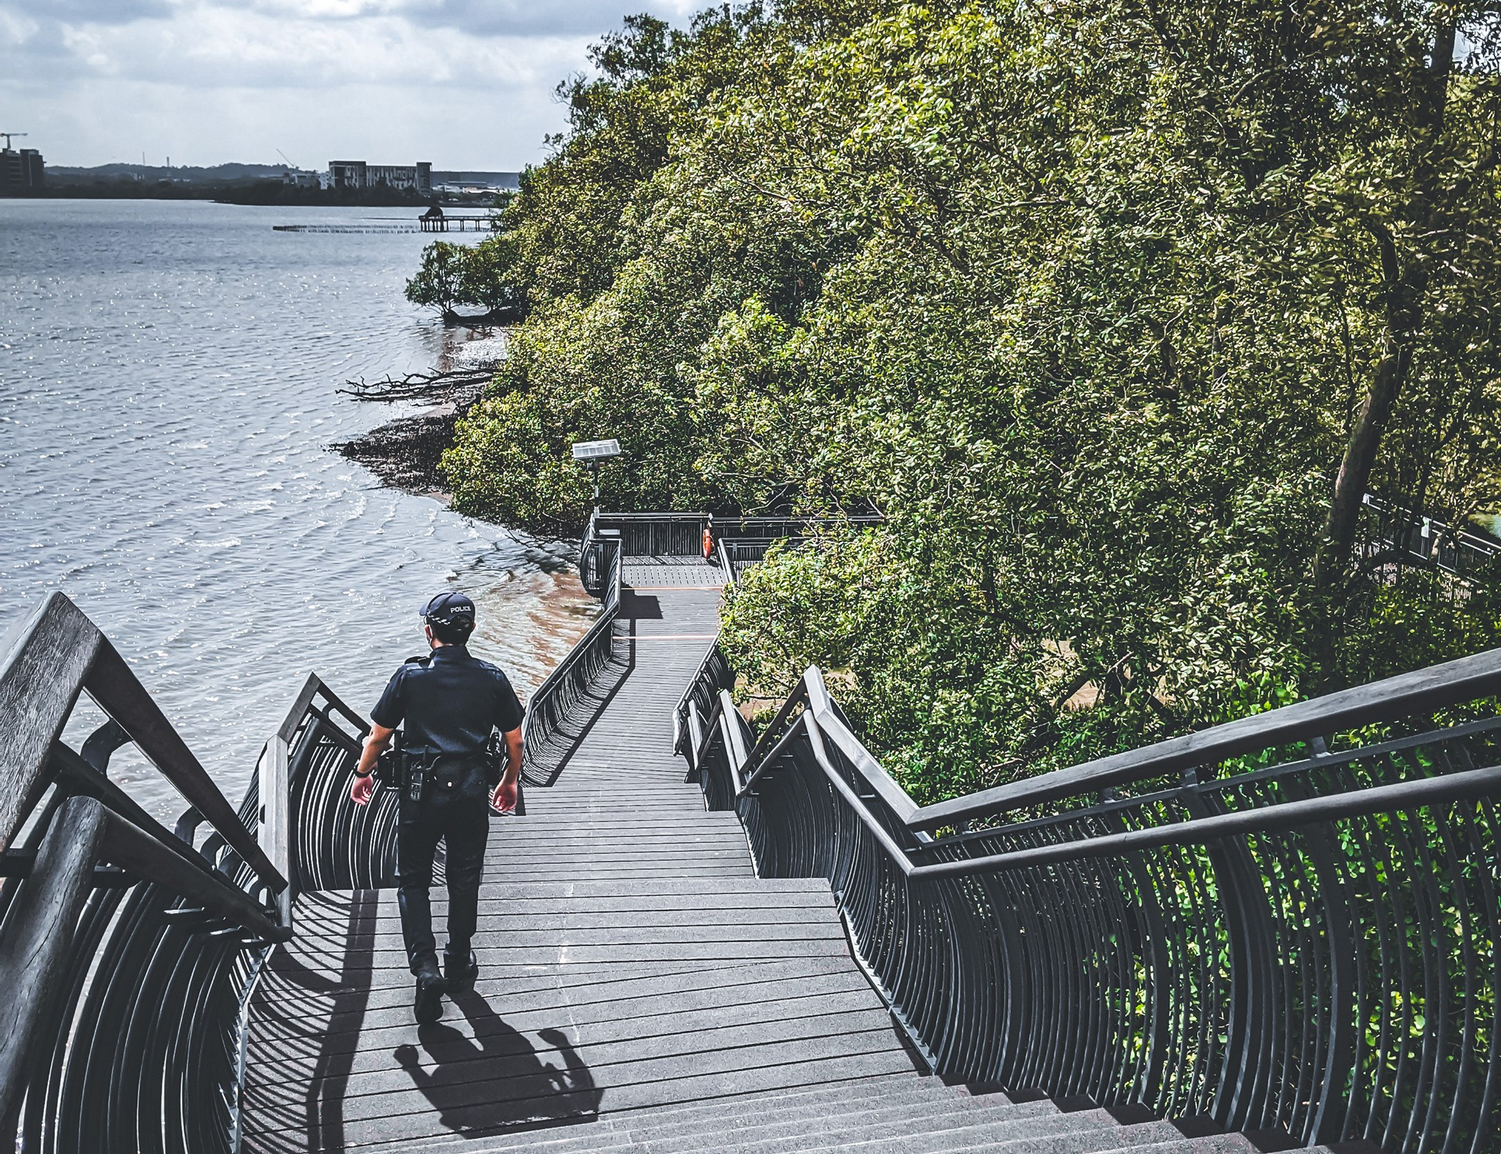 officer walking down a flight of wooden stairs. Infront of him is thick foliage and the sungei buloh reserve